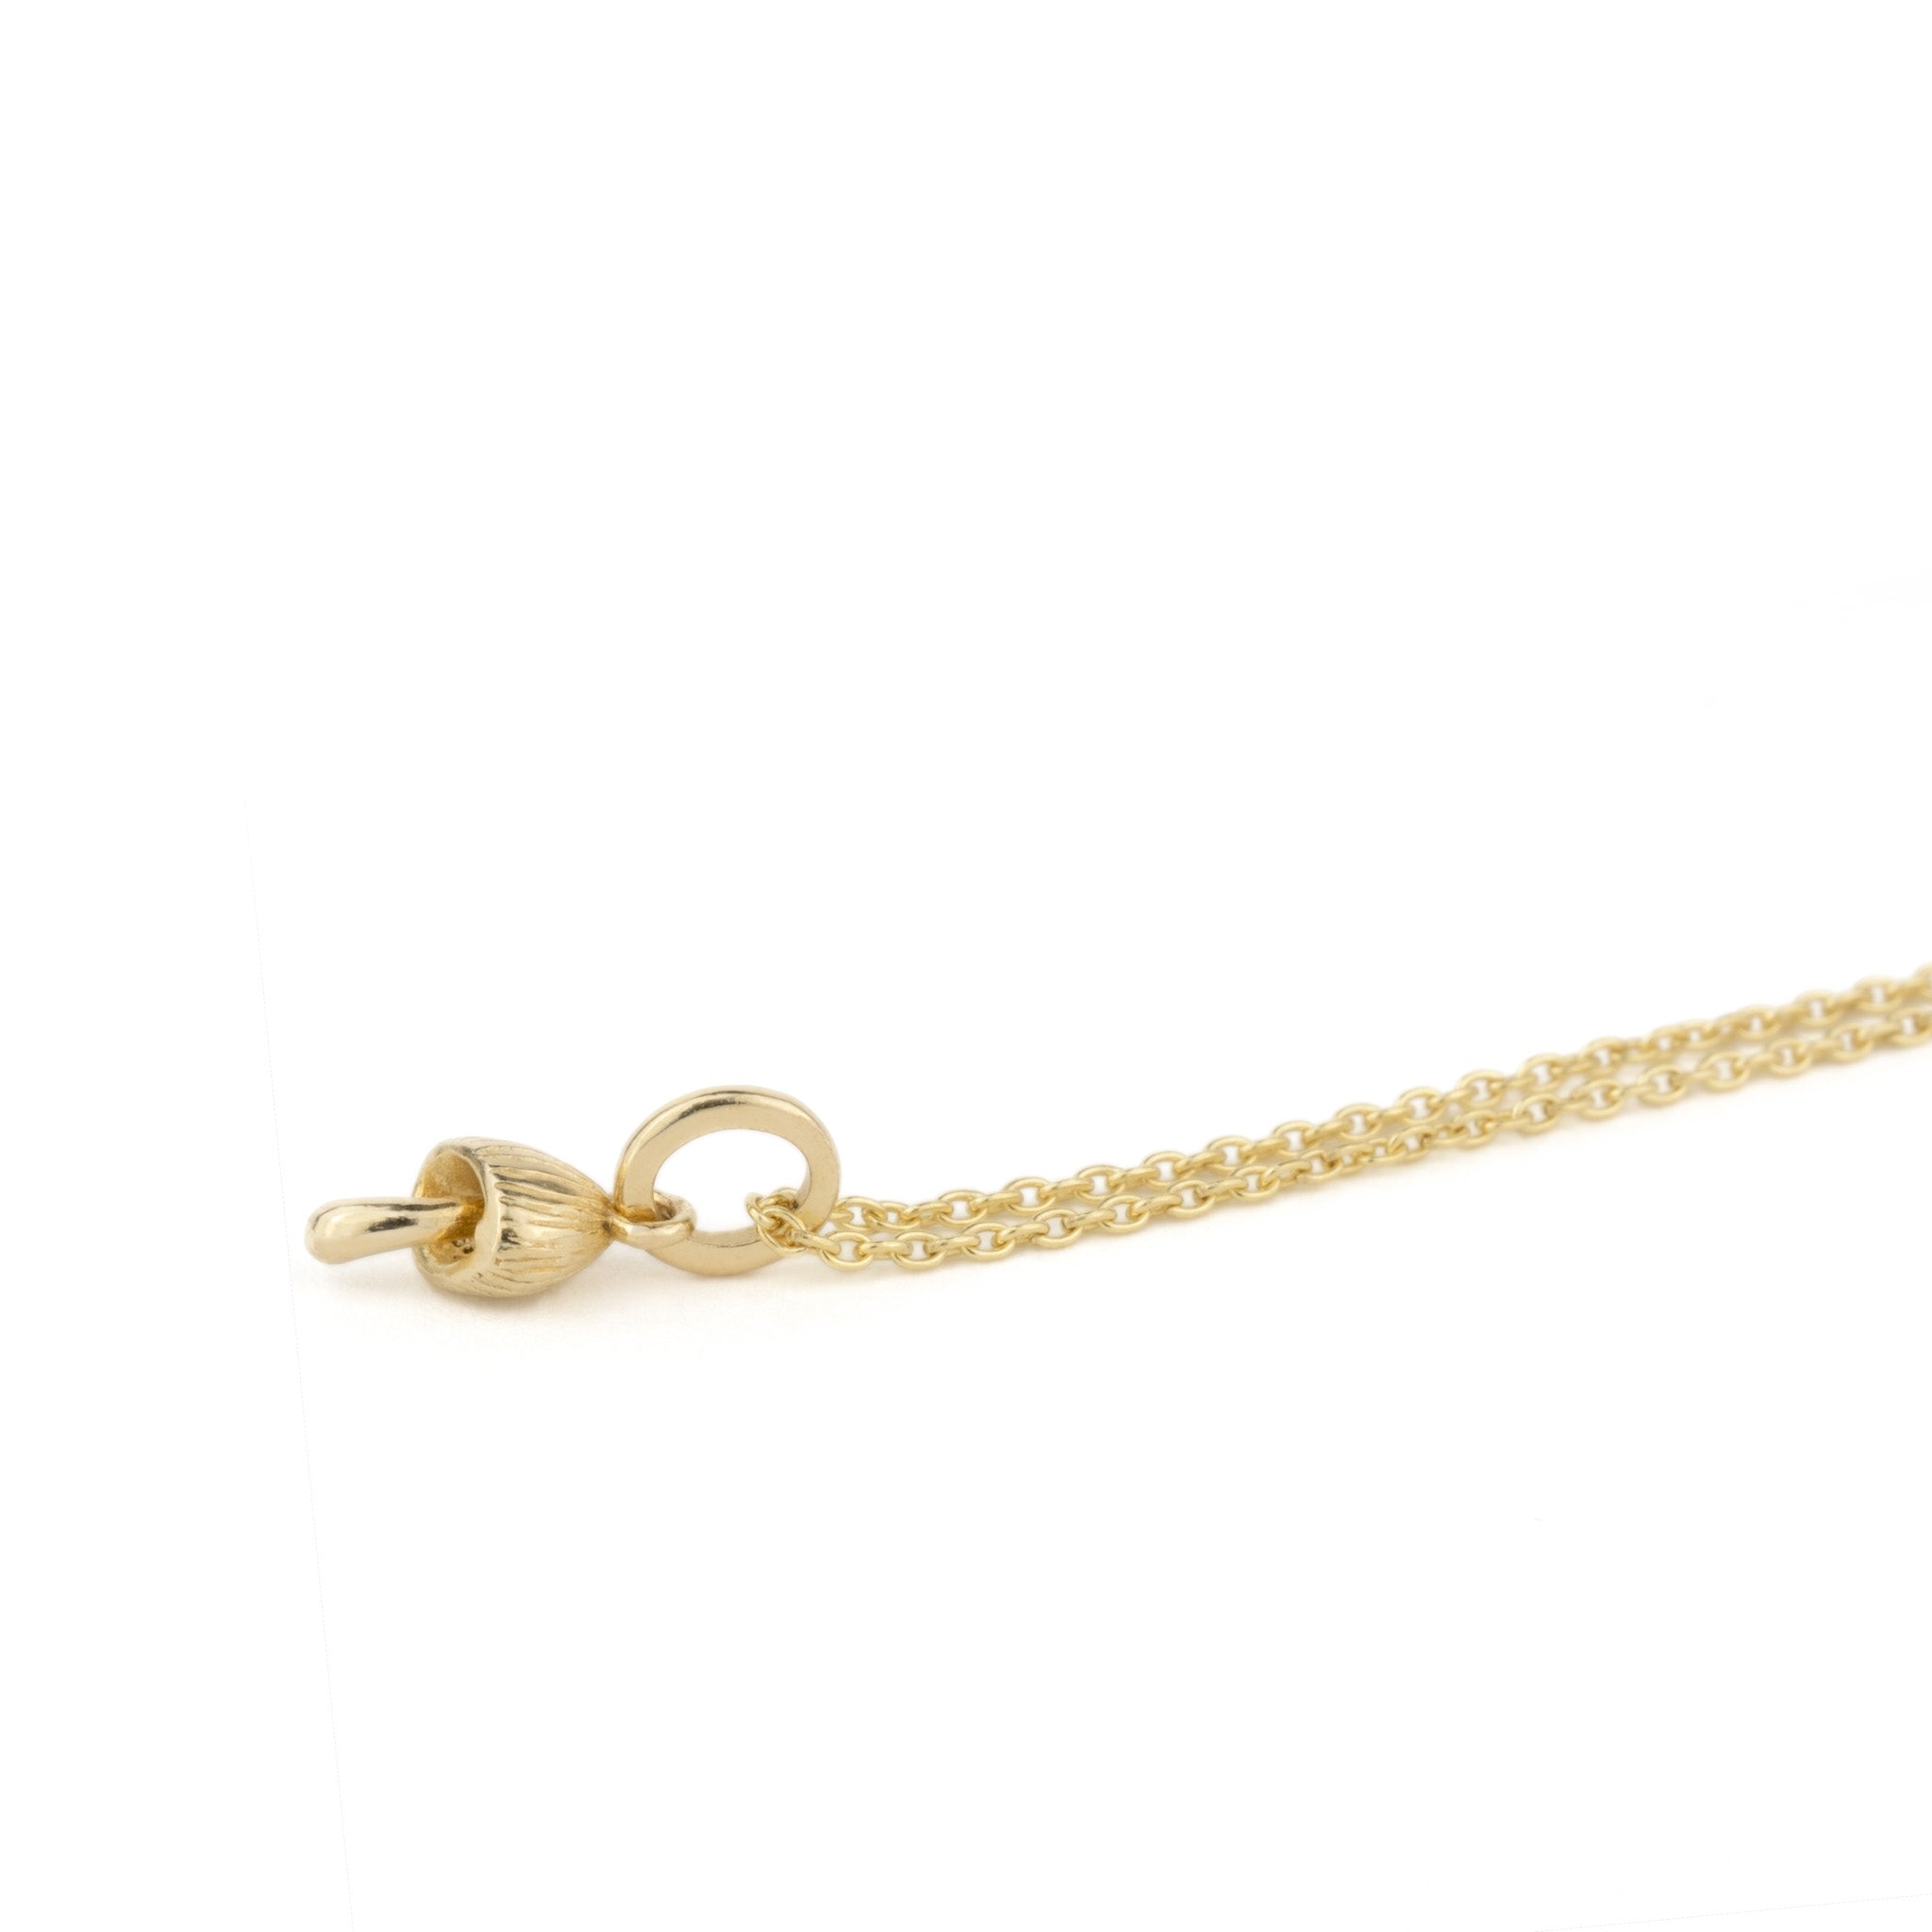 An Aiden Jae Mini Mushroom Charm Necklace with a knot on it.